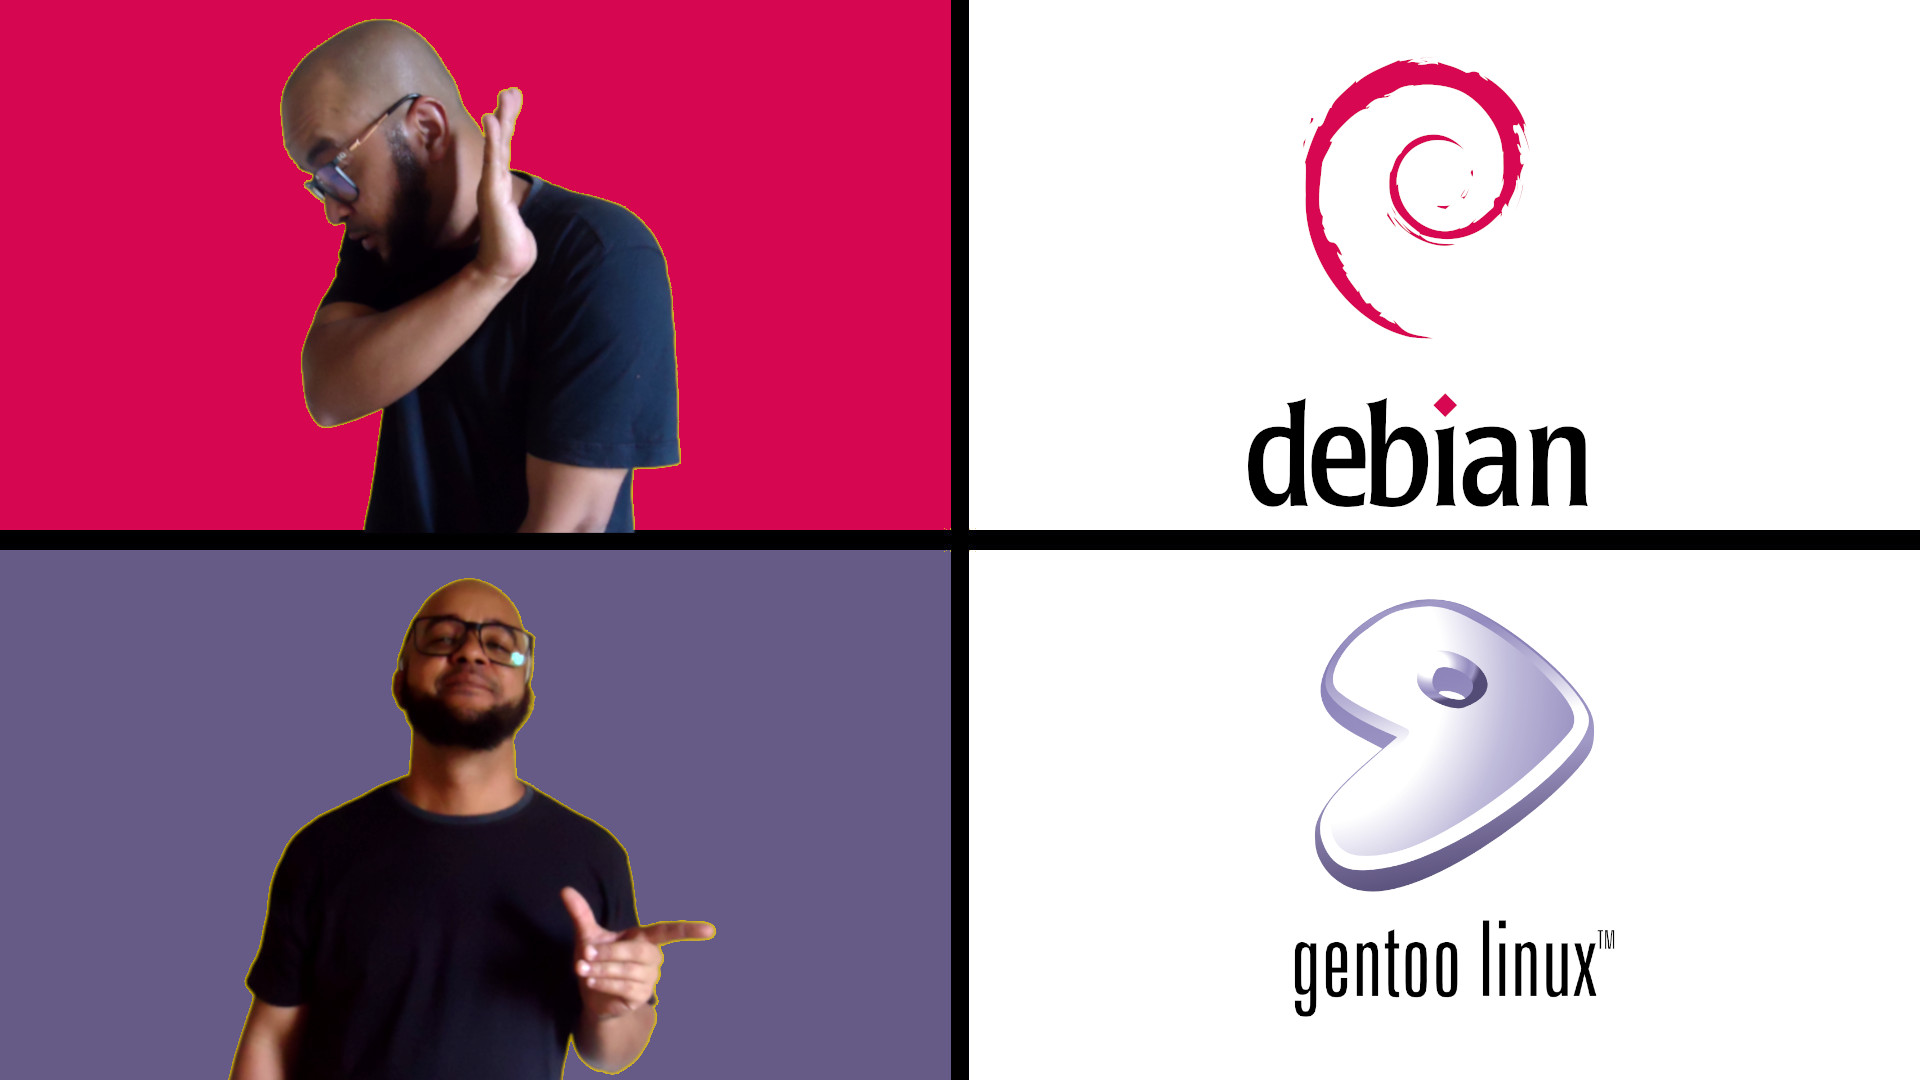 Many people ask me why I dont use Debian anymore.